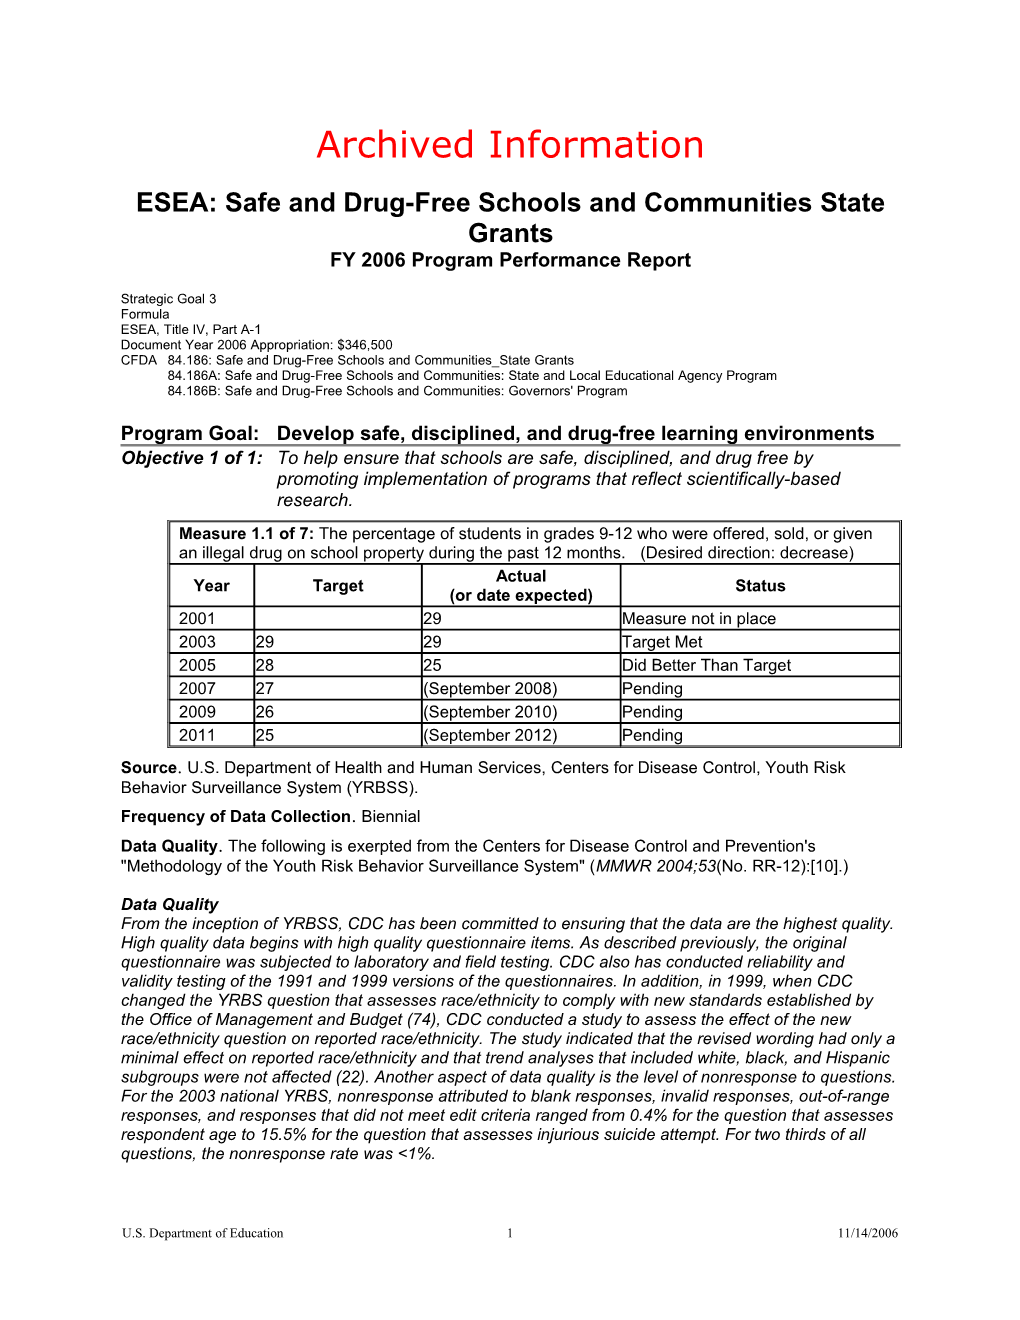 Archived: ESEA: Safe and Drug-Free Schools and Communities State Grants (MS Word)